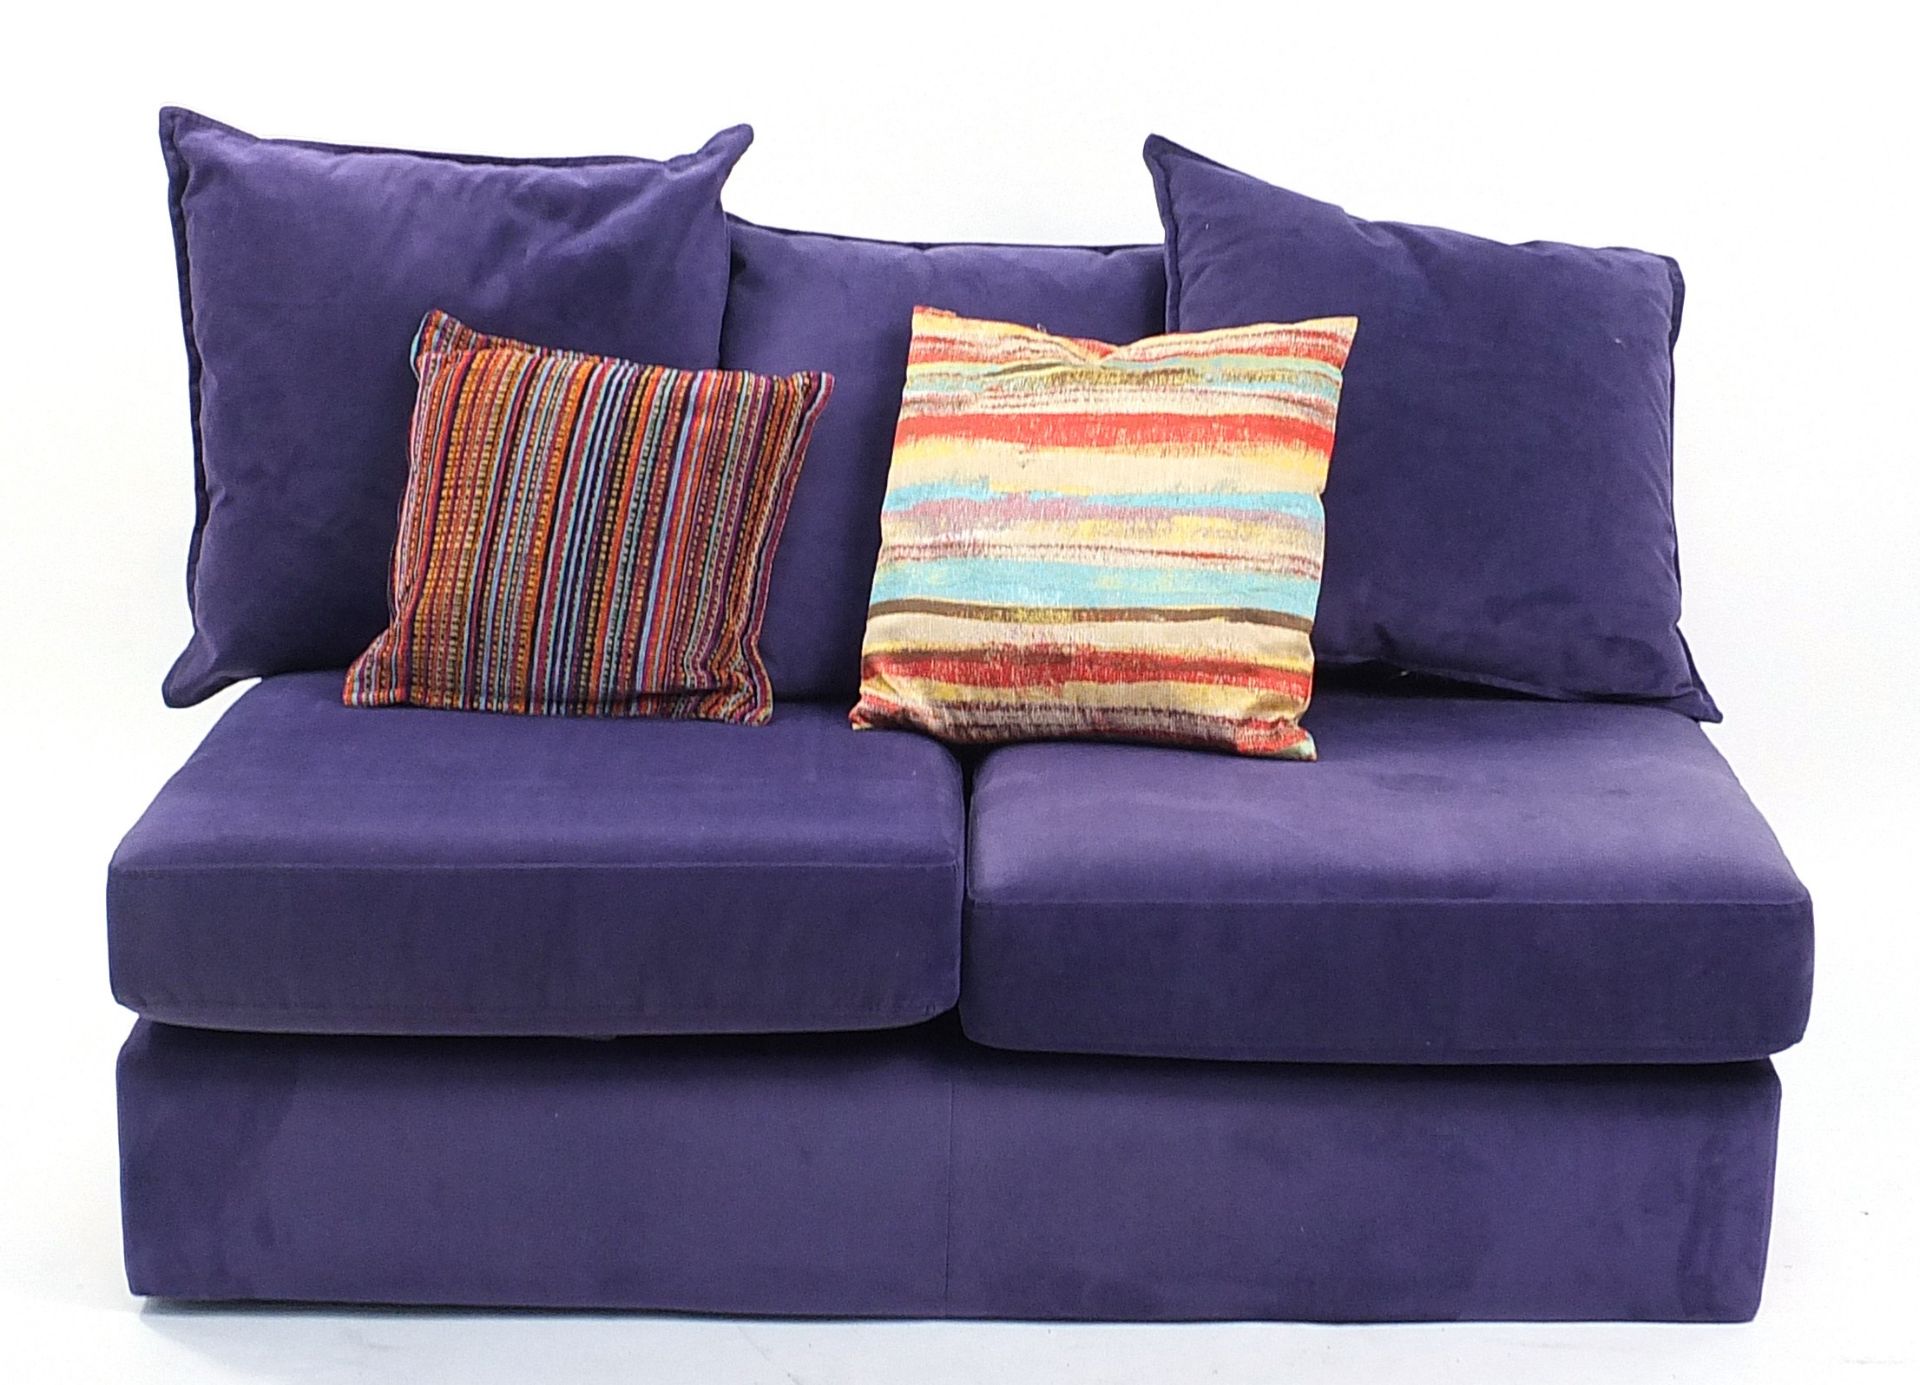 Contemporary DFS Skittle modular sofa with five sections, 88cm H x 330cm W x 240cm D as set up in - Bild 7 aus 10